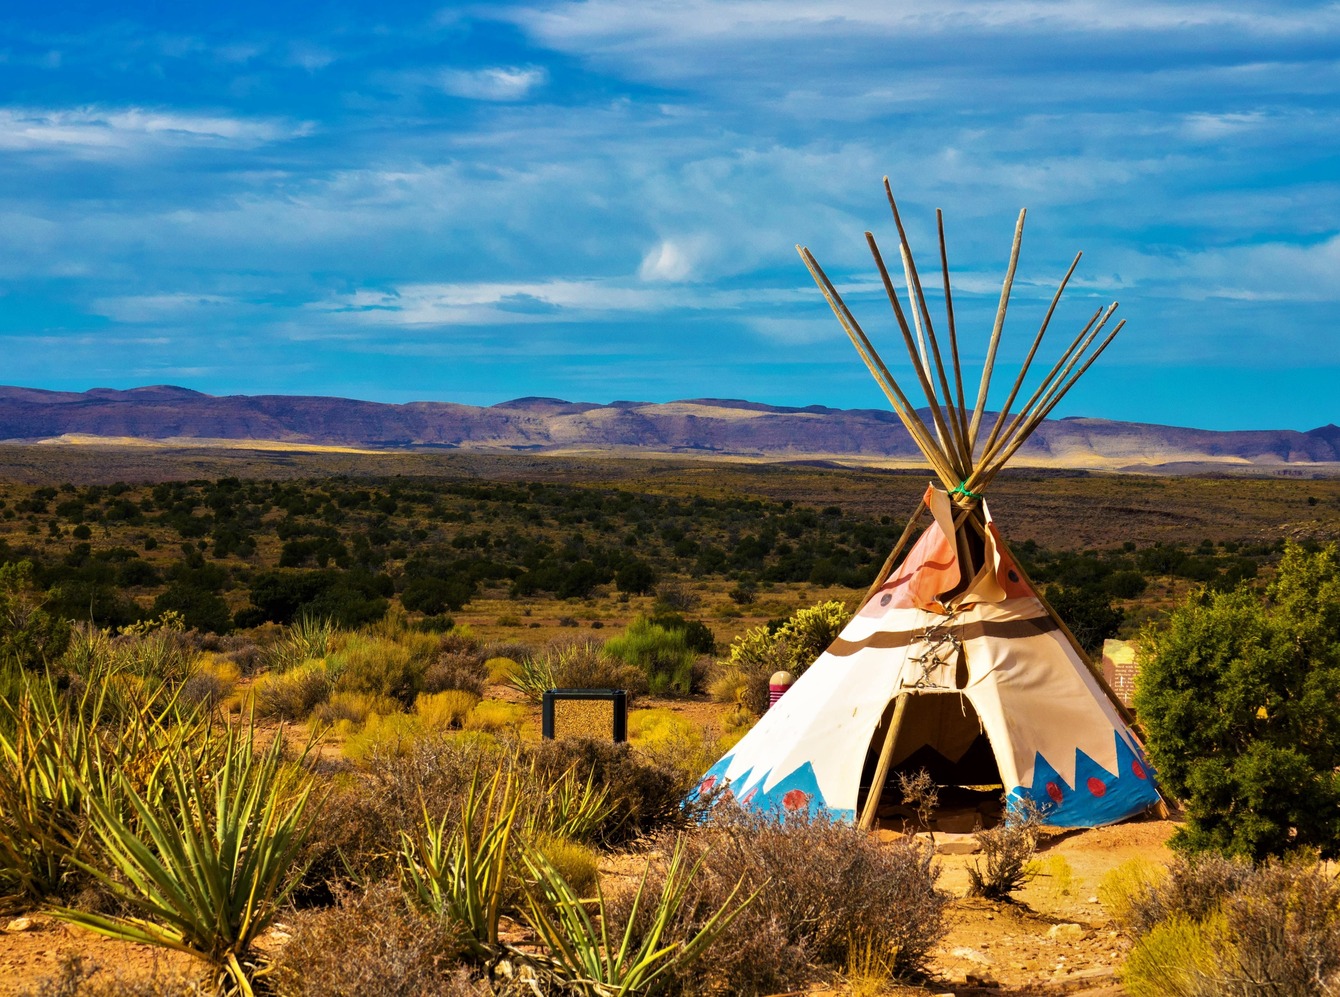 What is a Teepee (or tipi) Tent